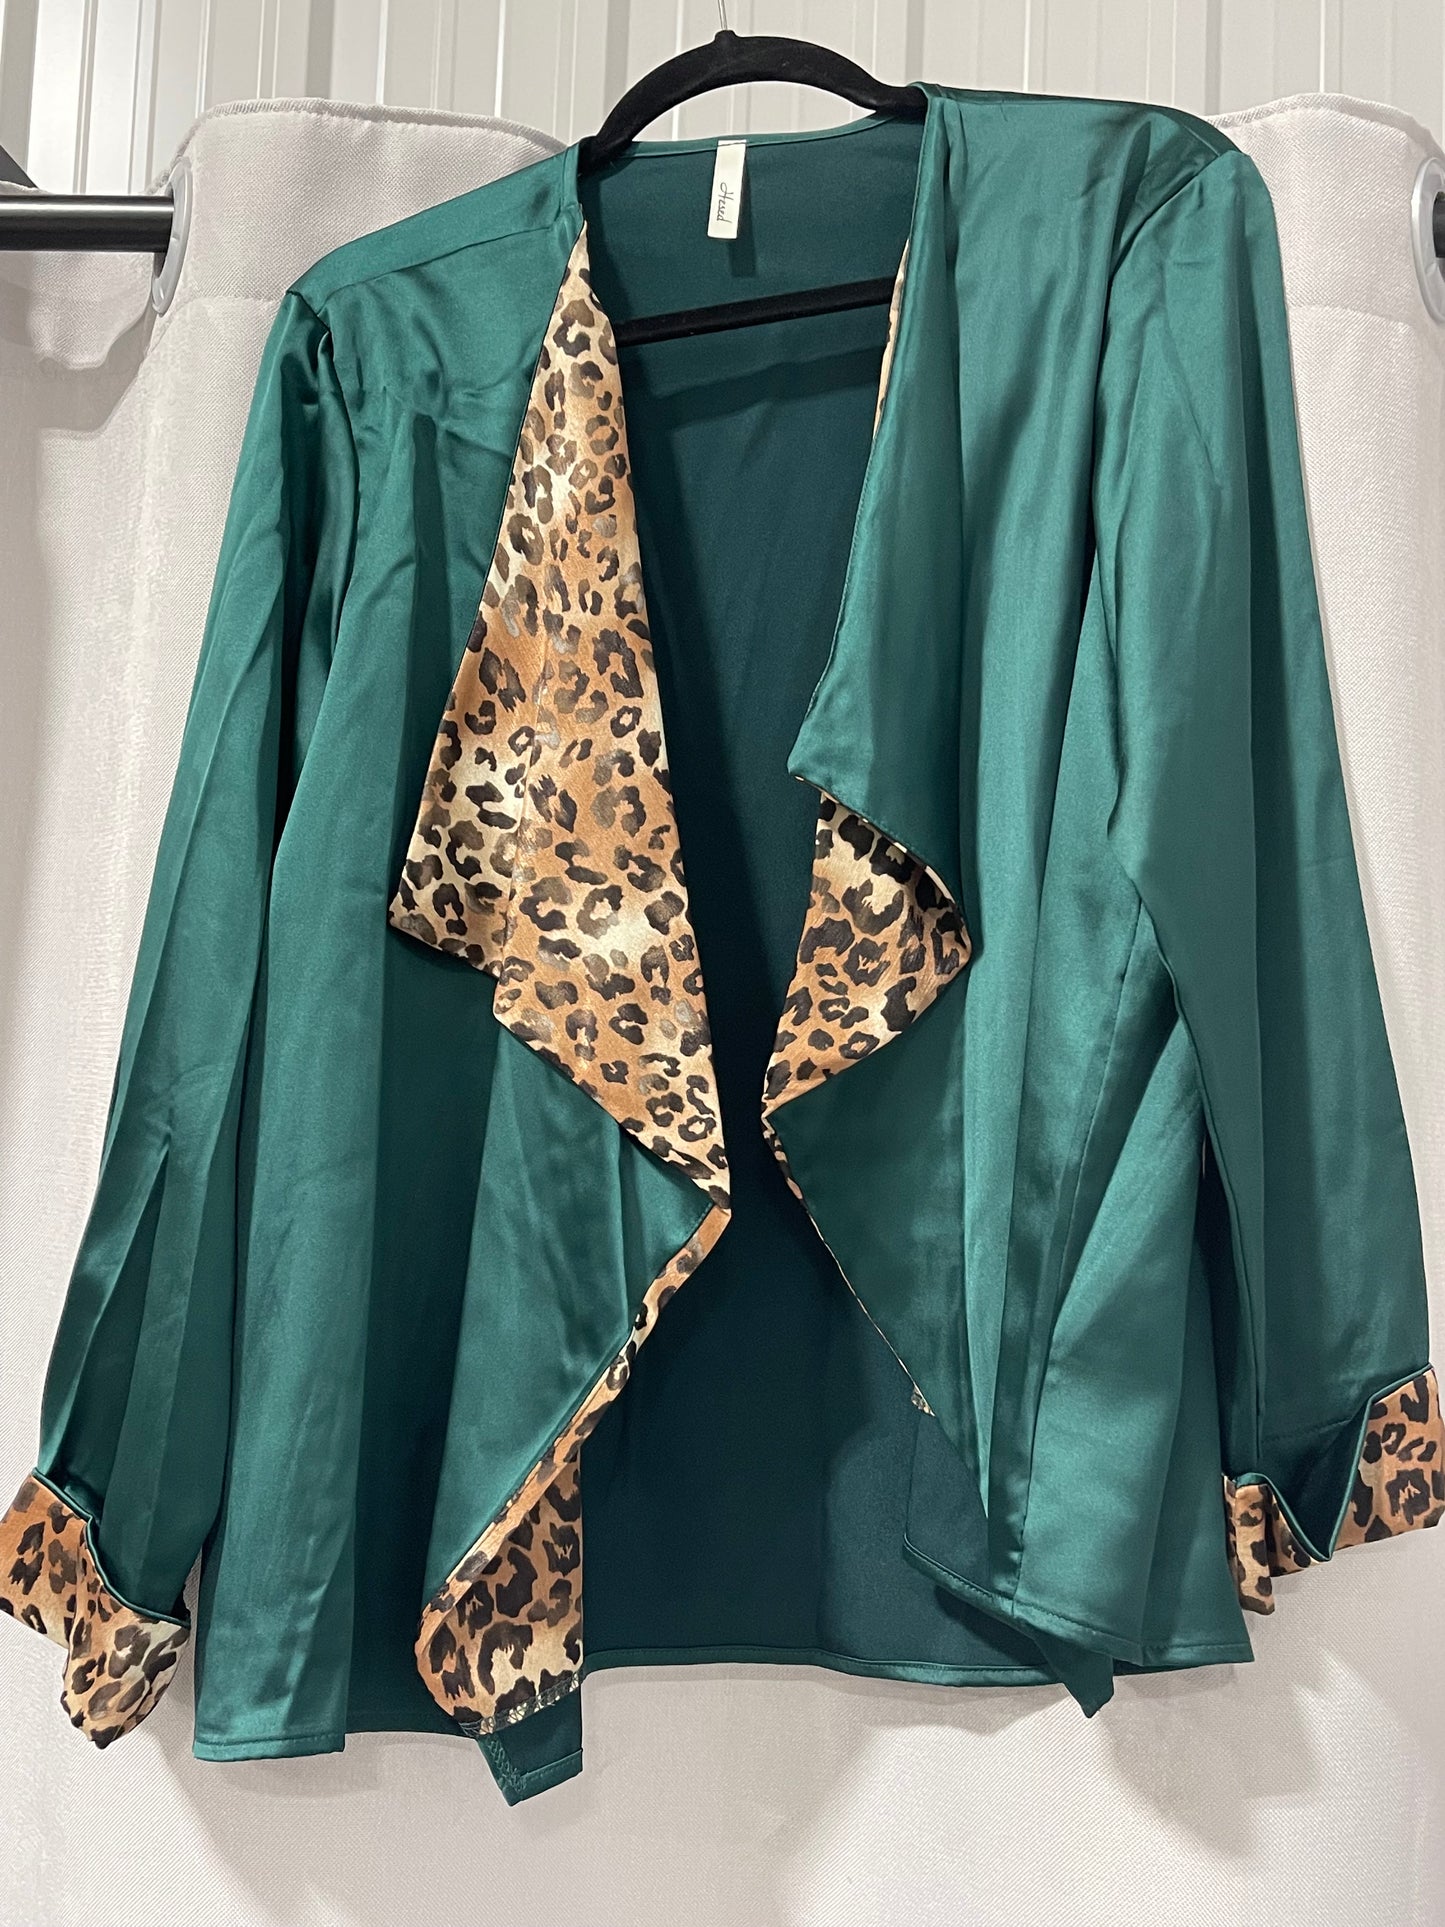 Green Satin and Leopard Jacket